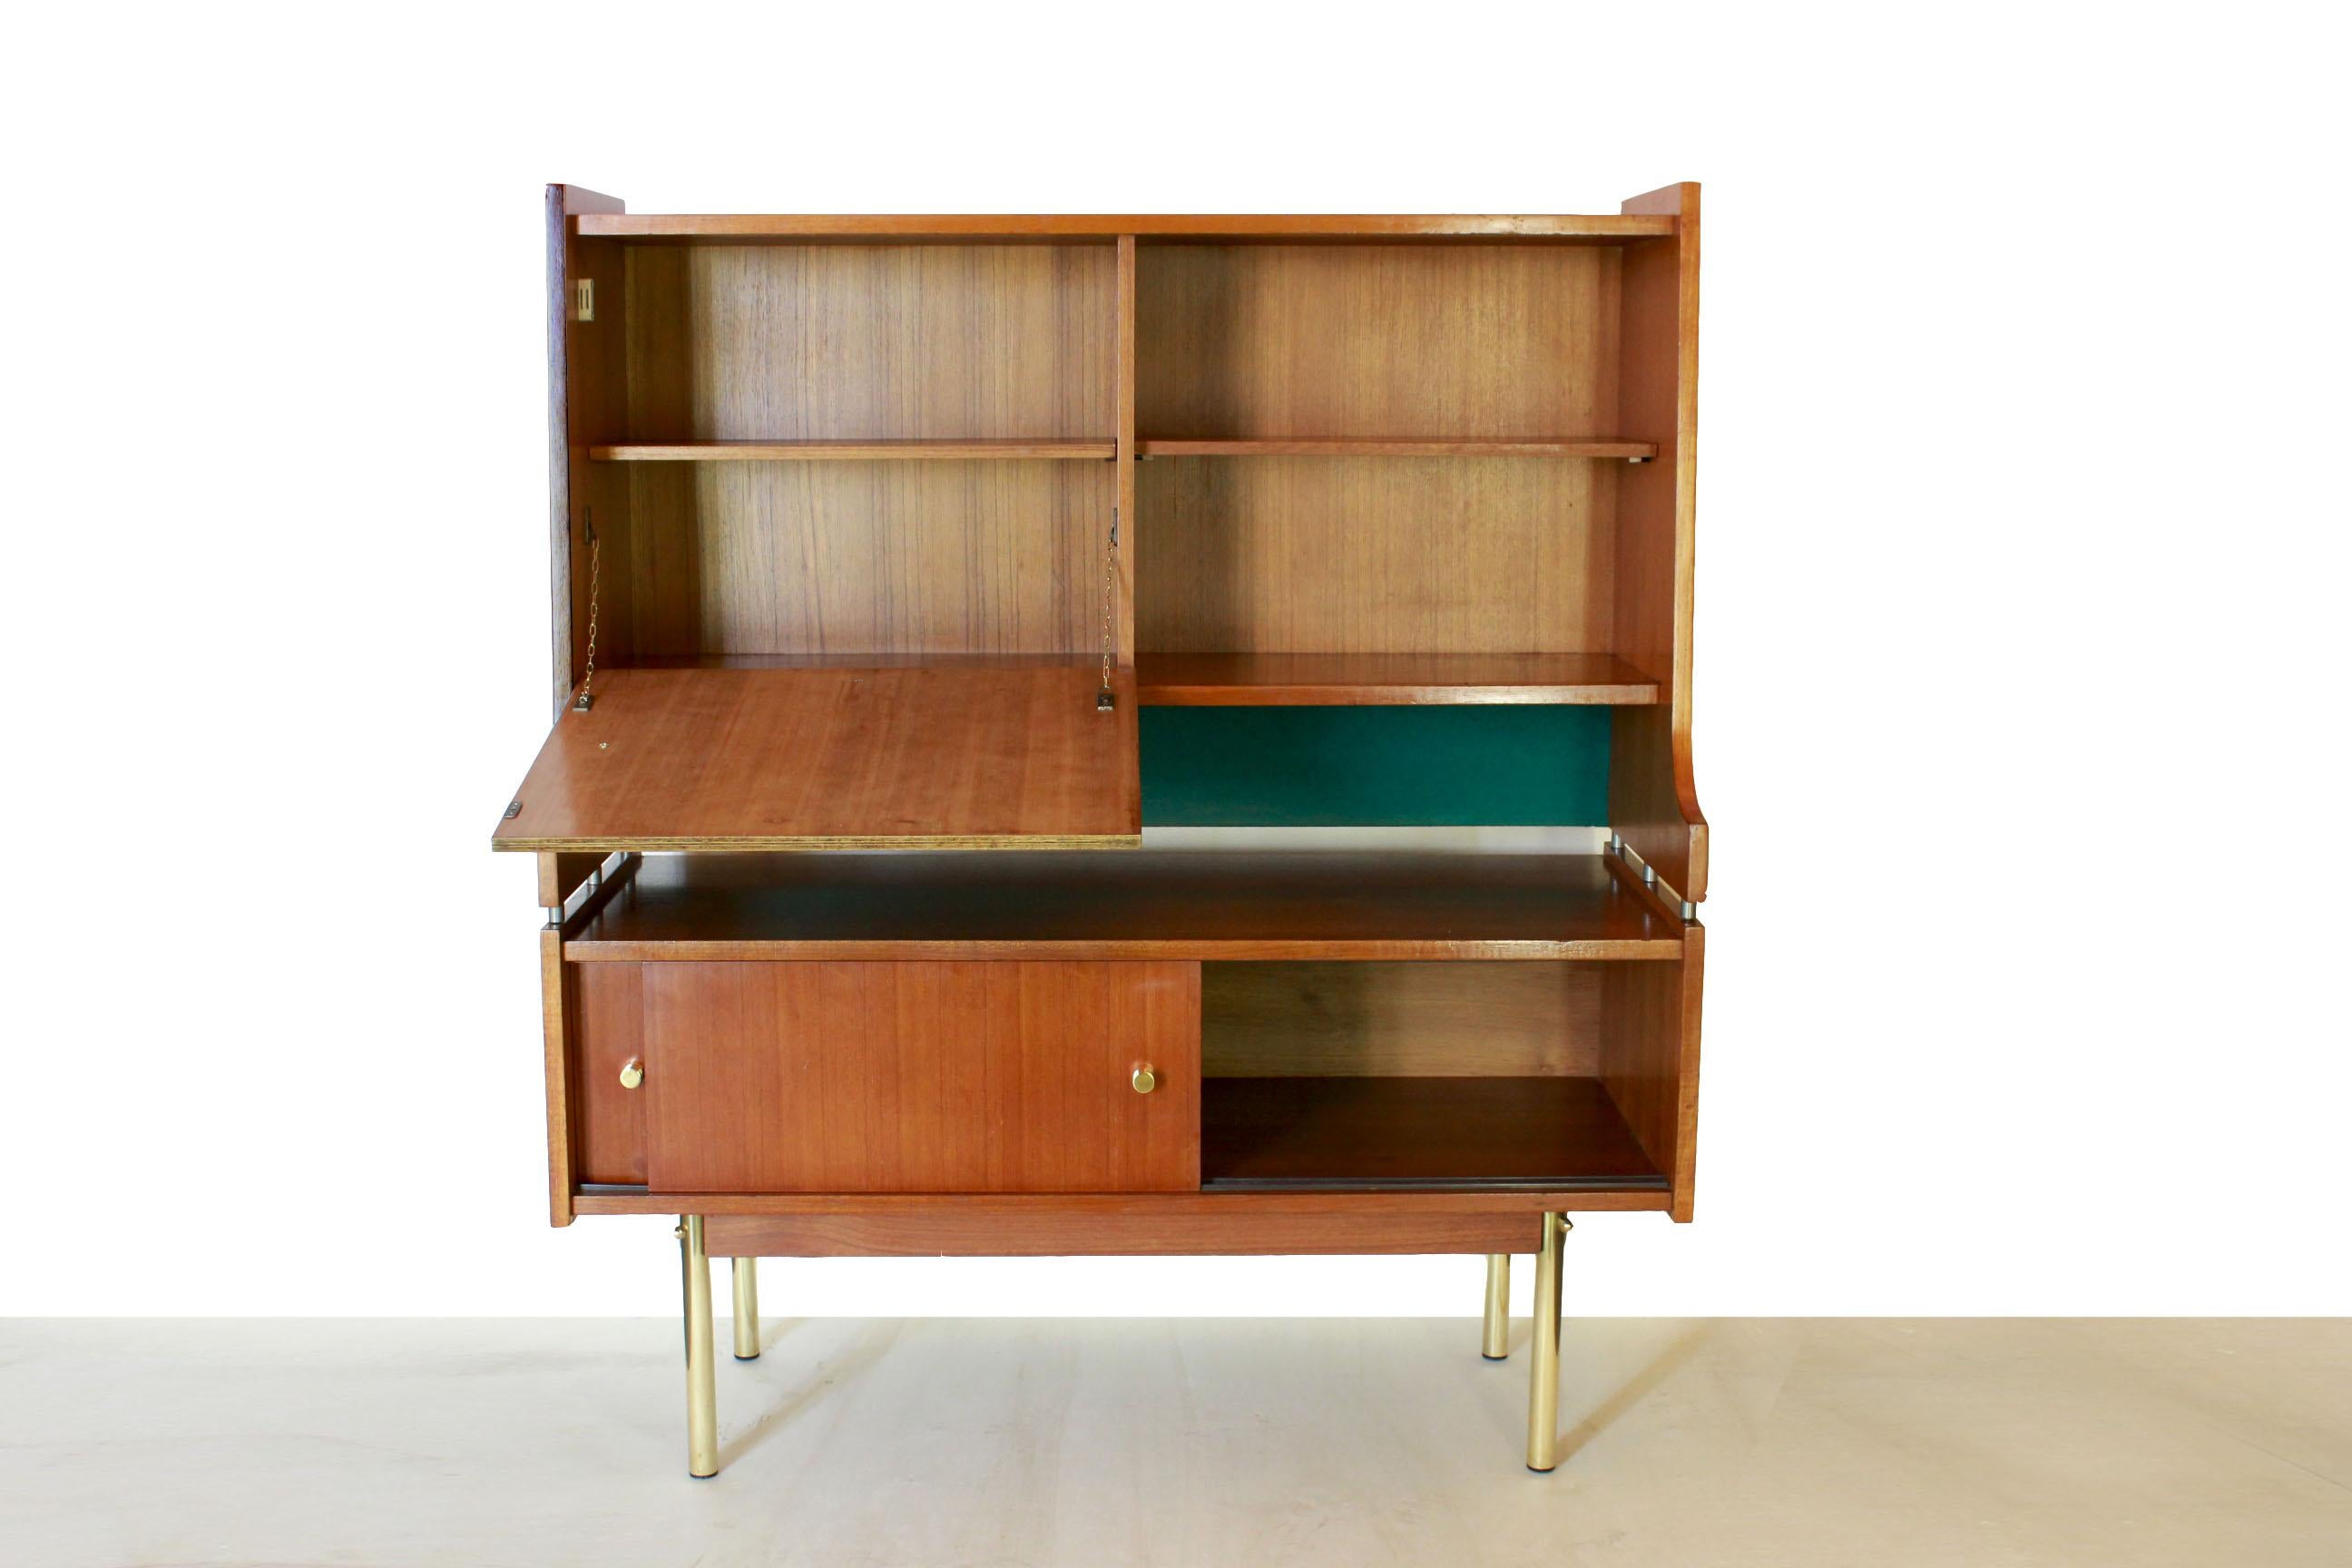 Vintage sideboard in solid teak and brass feet, Scandinavia, 1950s.
A 1950s solid teak wood sideboard with brass legs and pommels. A delicate conservative renovation has been made on wood (cleaned and polished). The pommels have been changed